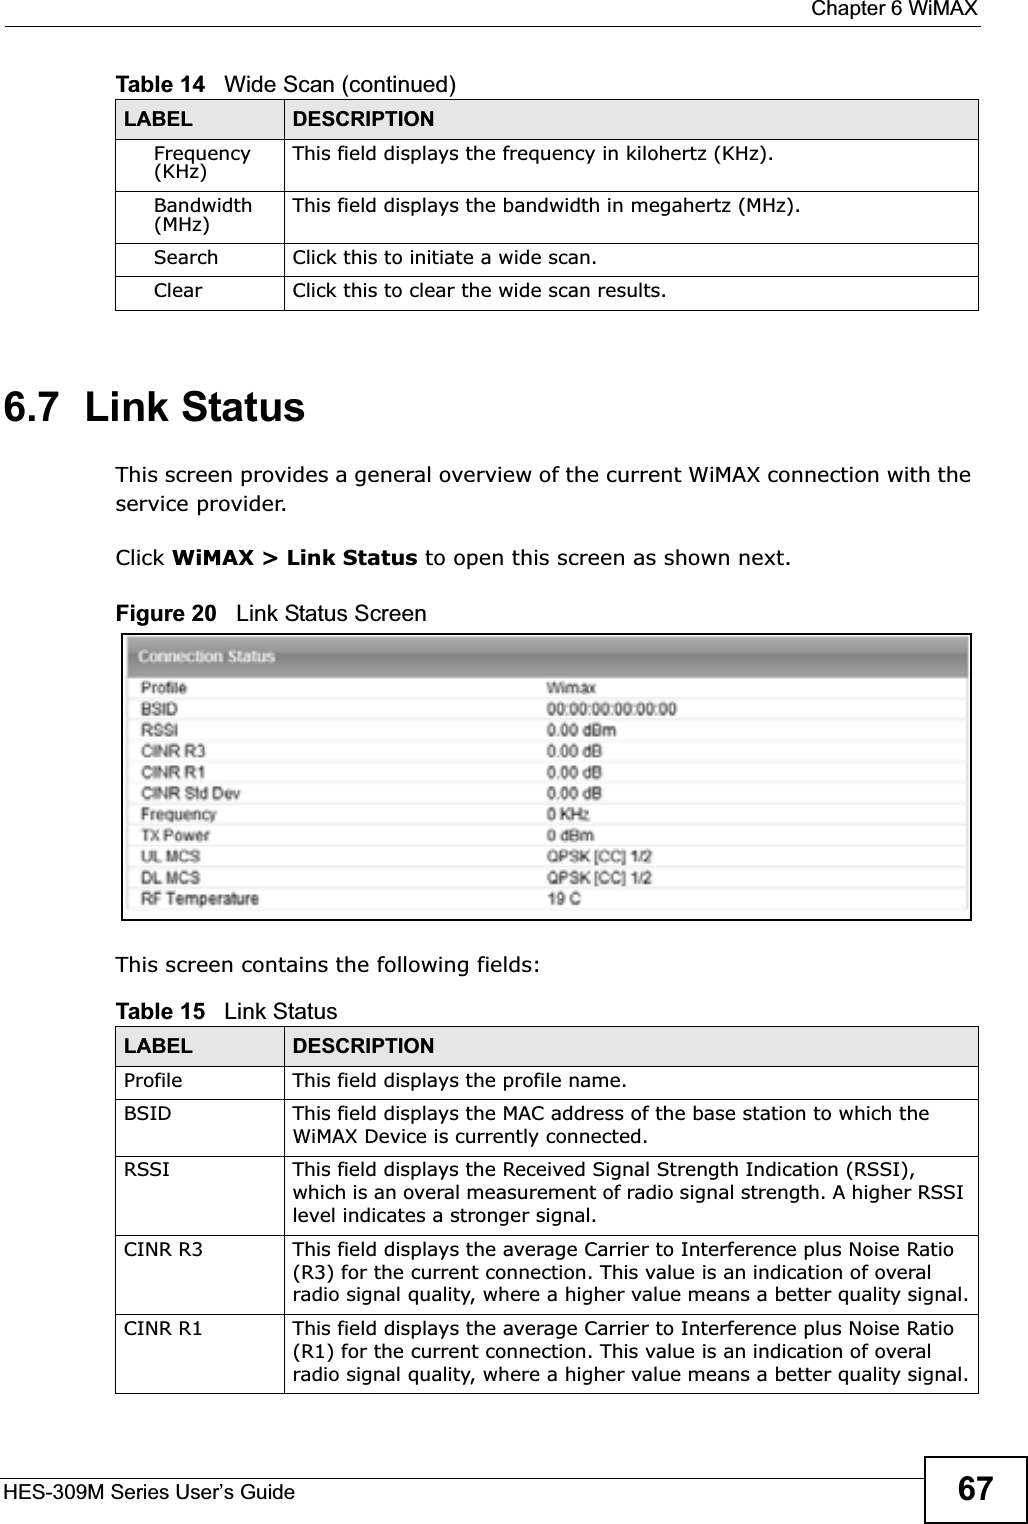  Chapter 6 WiMAXHES-309M Series User’s Guide 676.7  Link StatusThis screen provides a general overview of the current WiMAX connection with the service provider.Click WiMAX &gt; Link Status to open this screen as shown next.Figure 20   Link Status ScreenThis screen contains the following fields:Frequency(KHz) This field displays the frequency in kilohertz (KHz).Bandwidth (MHz) This field displays the bandwidth in megahertz (MHz).Search Click this to initiate a wide scan.Clear Click this to clear the wide scan results.Table 14   Wide Scan (continued)LABEL DESCRIPTIONTable 15   Link StatusLABEL DESCRIPTIONProfile This field displays the profile name.BSID This field displays the MAC address of the base station to which the WiMAX Device is currently connected.RSSI This field displays the Received Signal Strength Indication (RSSI), which is an overal measurement of radio signal strength. A higher RSSI level indicates a stronger signal.CINR R3 This field displays the average Carrier to Interference plus Noise Ratio (R3) for the current connection. This value is an indication of overal radio signal quality, where a higher value means a better quality signal.CINR R1 This field displays the average Carrier to Interference plus Noise Ratio (R1) for the current connection. This value is an indication of overal radio signal quality, where a higher value means a better quality signal.